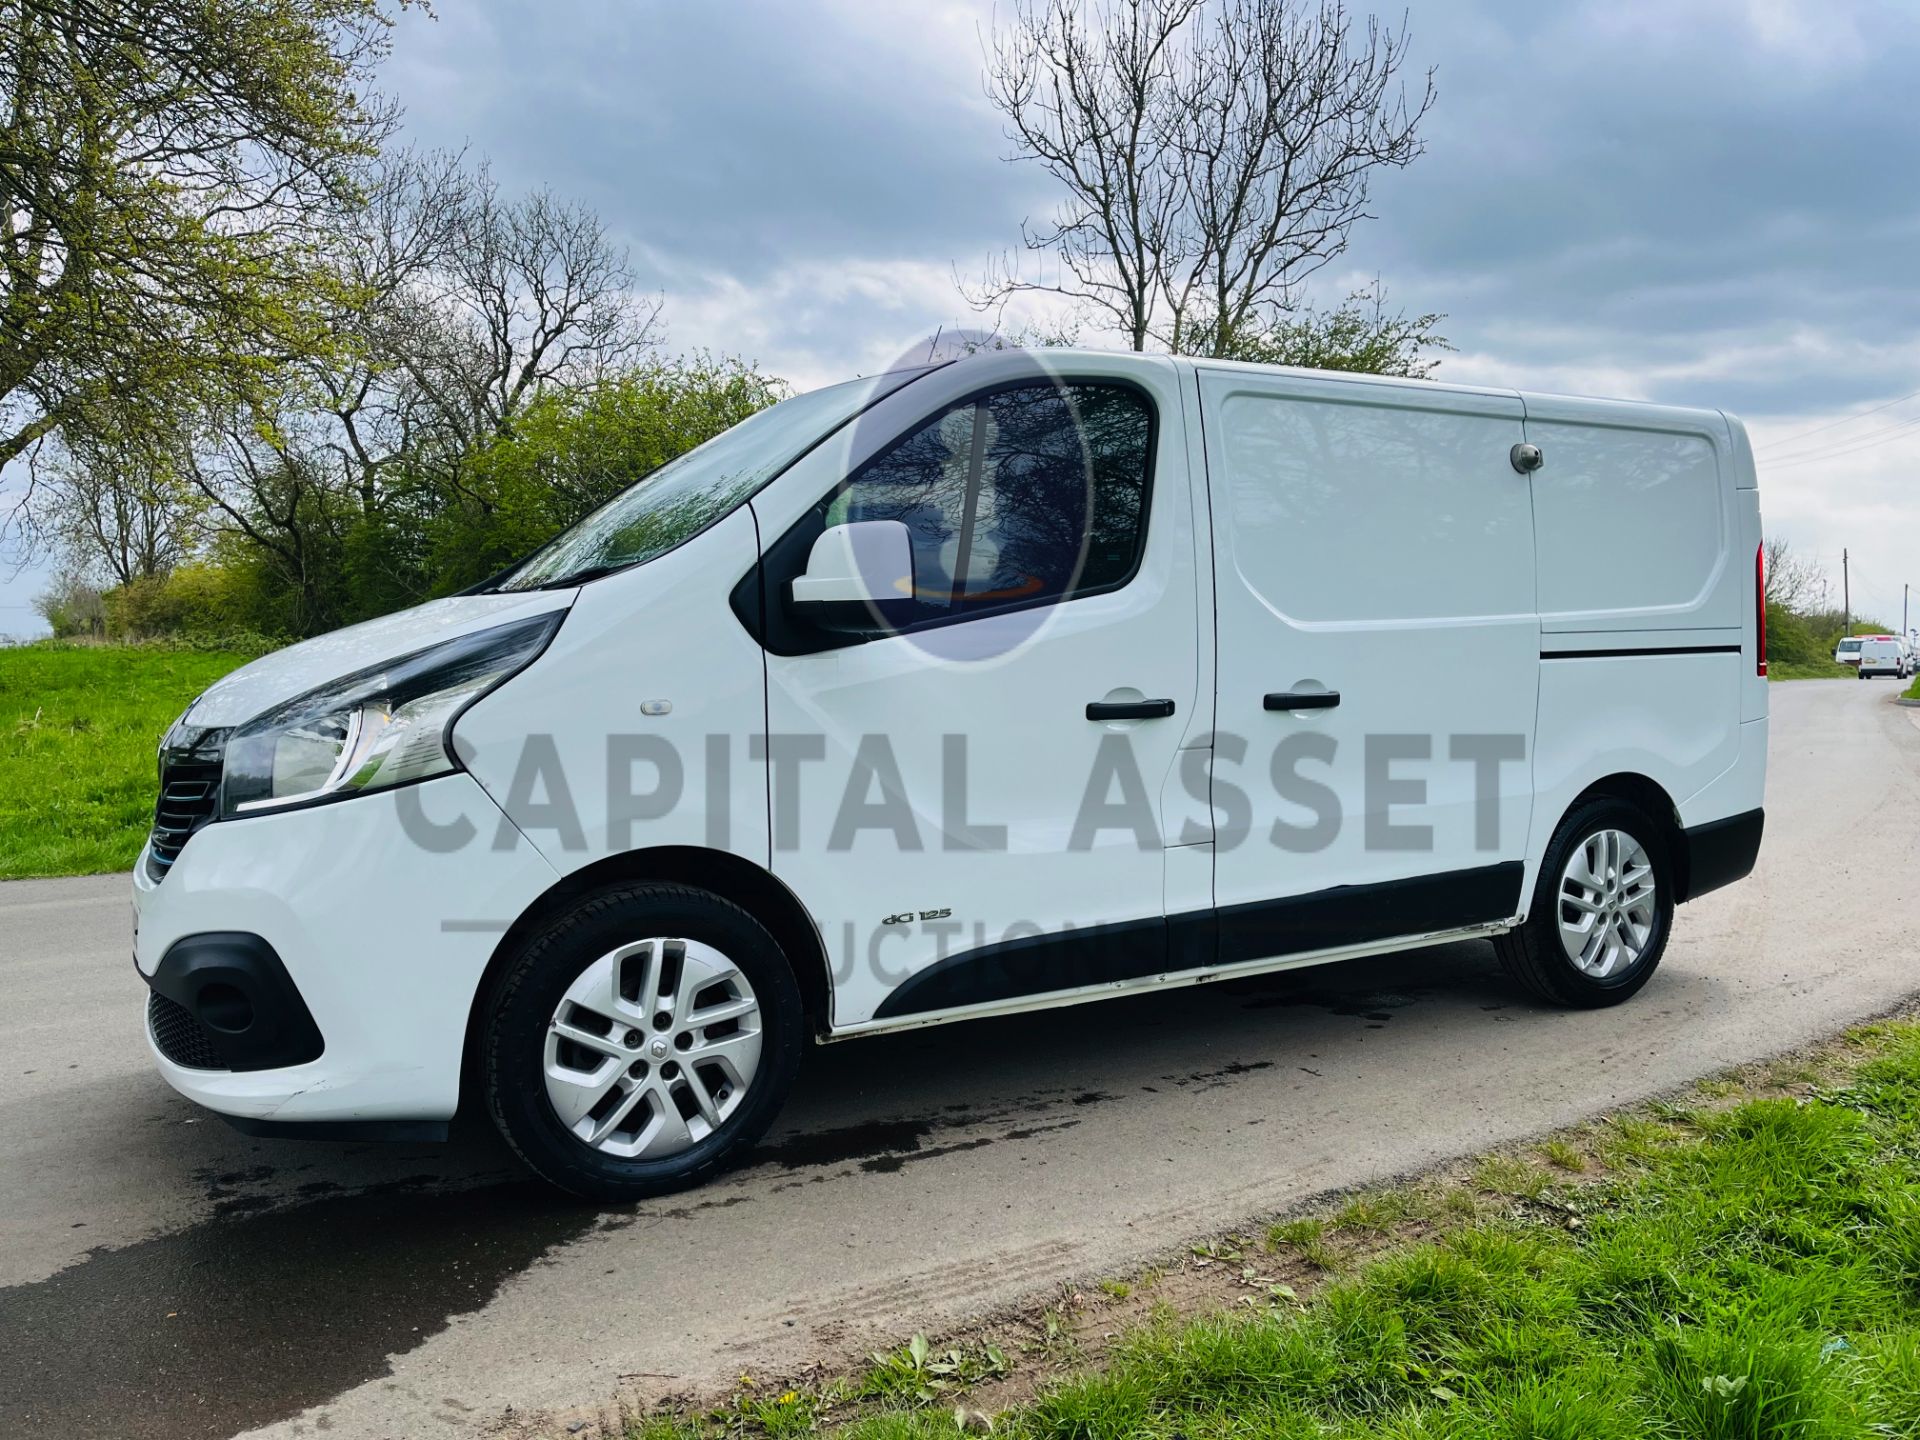 (ON SALE) RENAULT TRAFIC DCI-ENERGY SPORT (2018 MODEL) 1 OWNER WITH HISTORY - SAT NAV - (AC) EURO 6 - Image 7 of 23